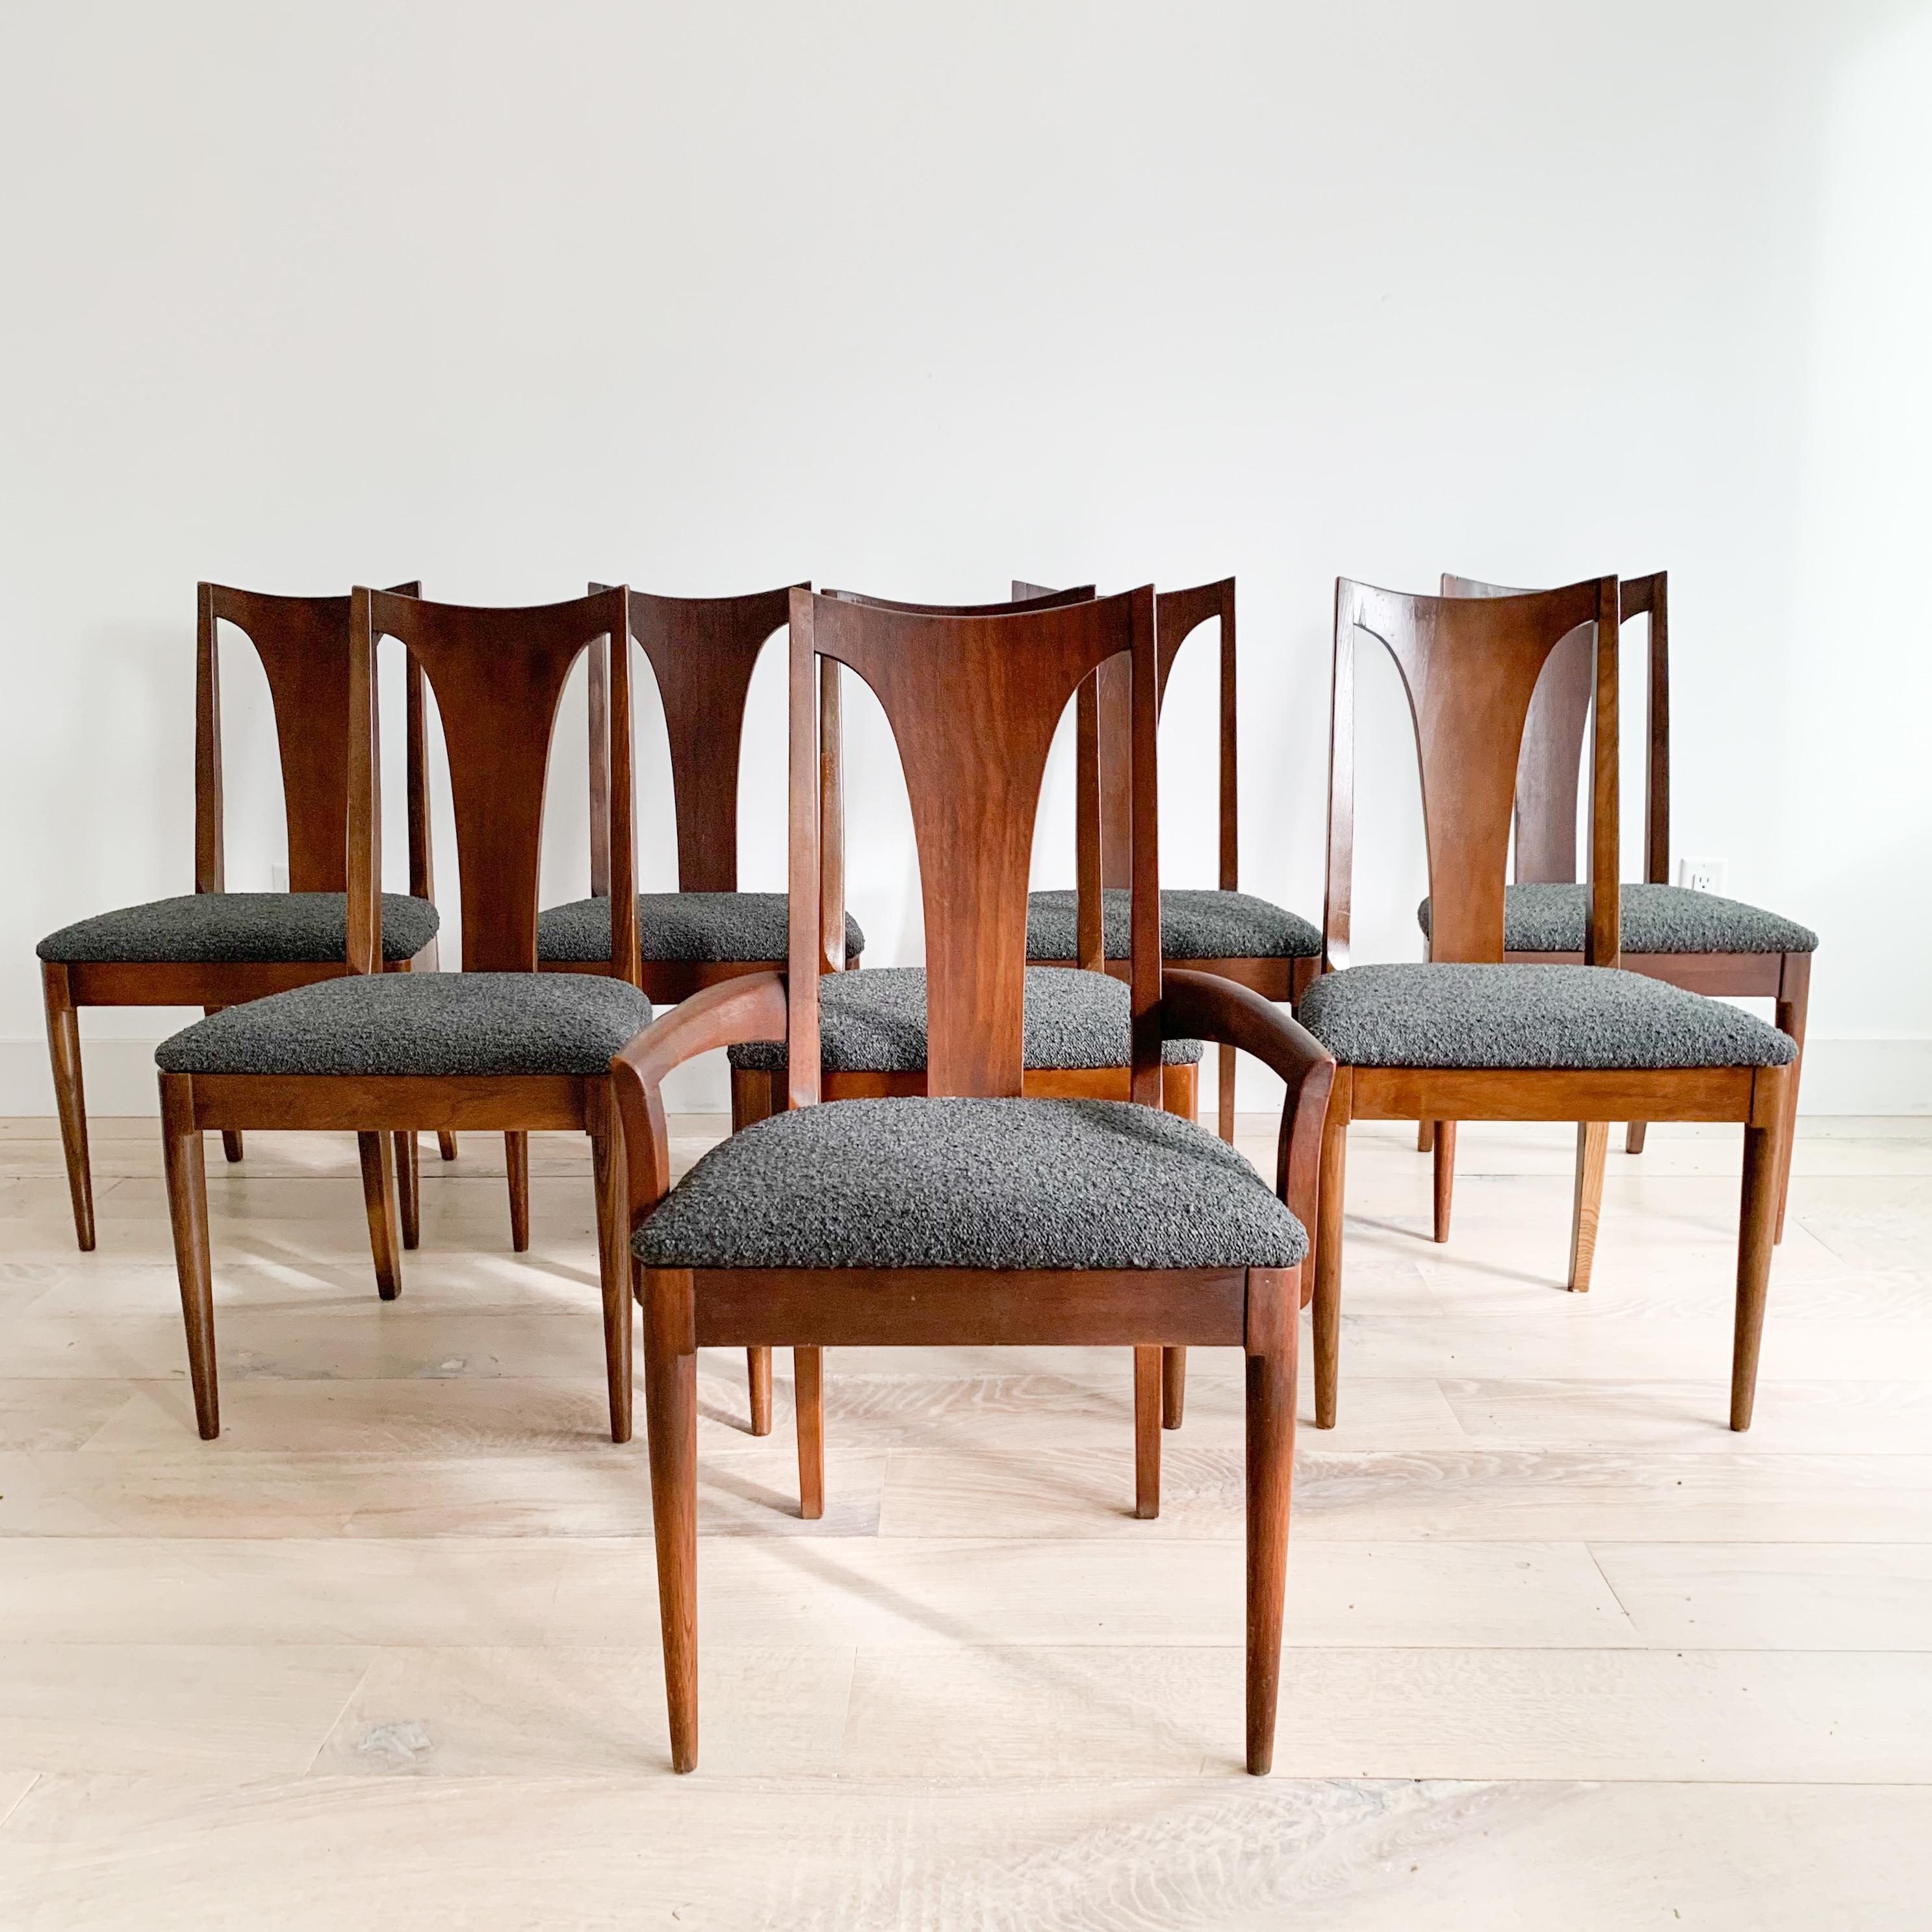 Set of 8 mid century modern dining chairs by the Broyhill Brasilia line. Some light scuffing/scratching/small areas of veneer repair. New charcoal grey boucle upholstery.
